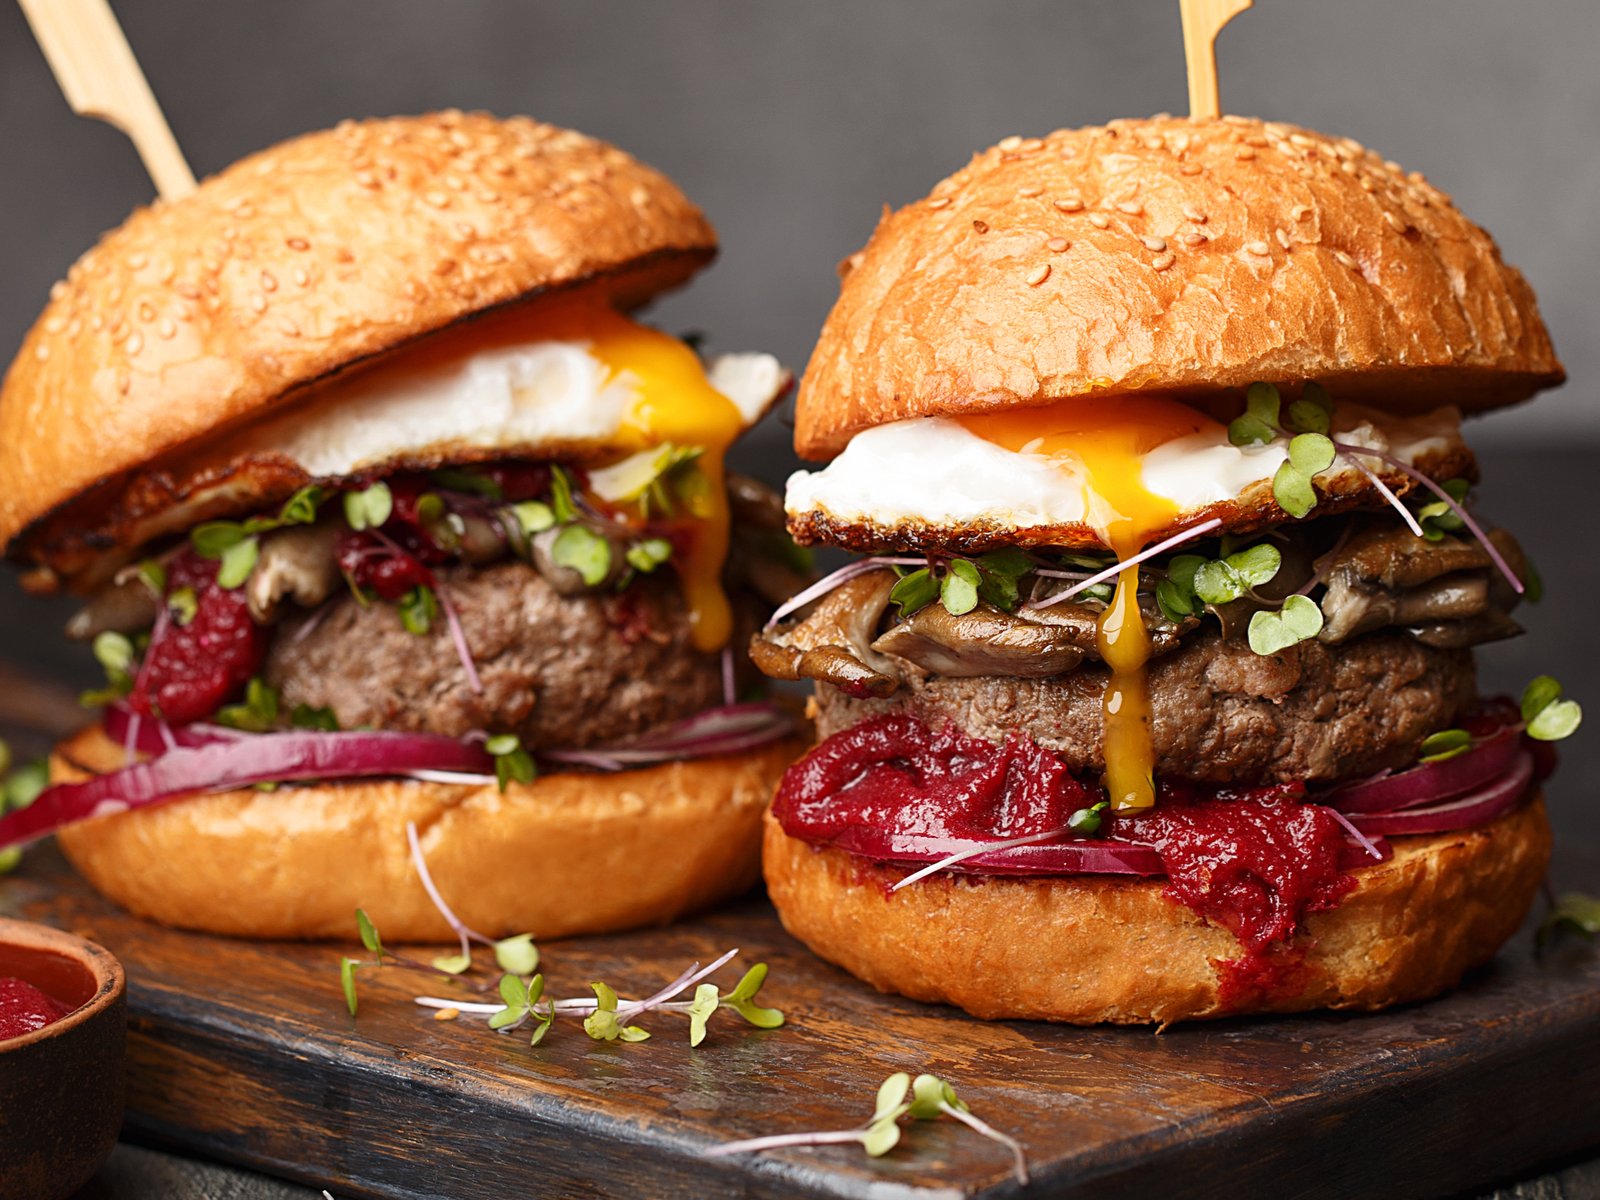 Gourmet burgers are all the rage but you can keep it simple too.